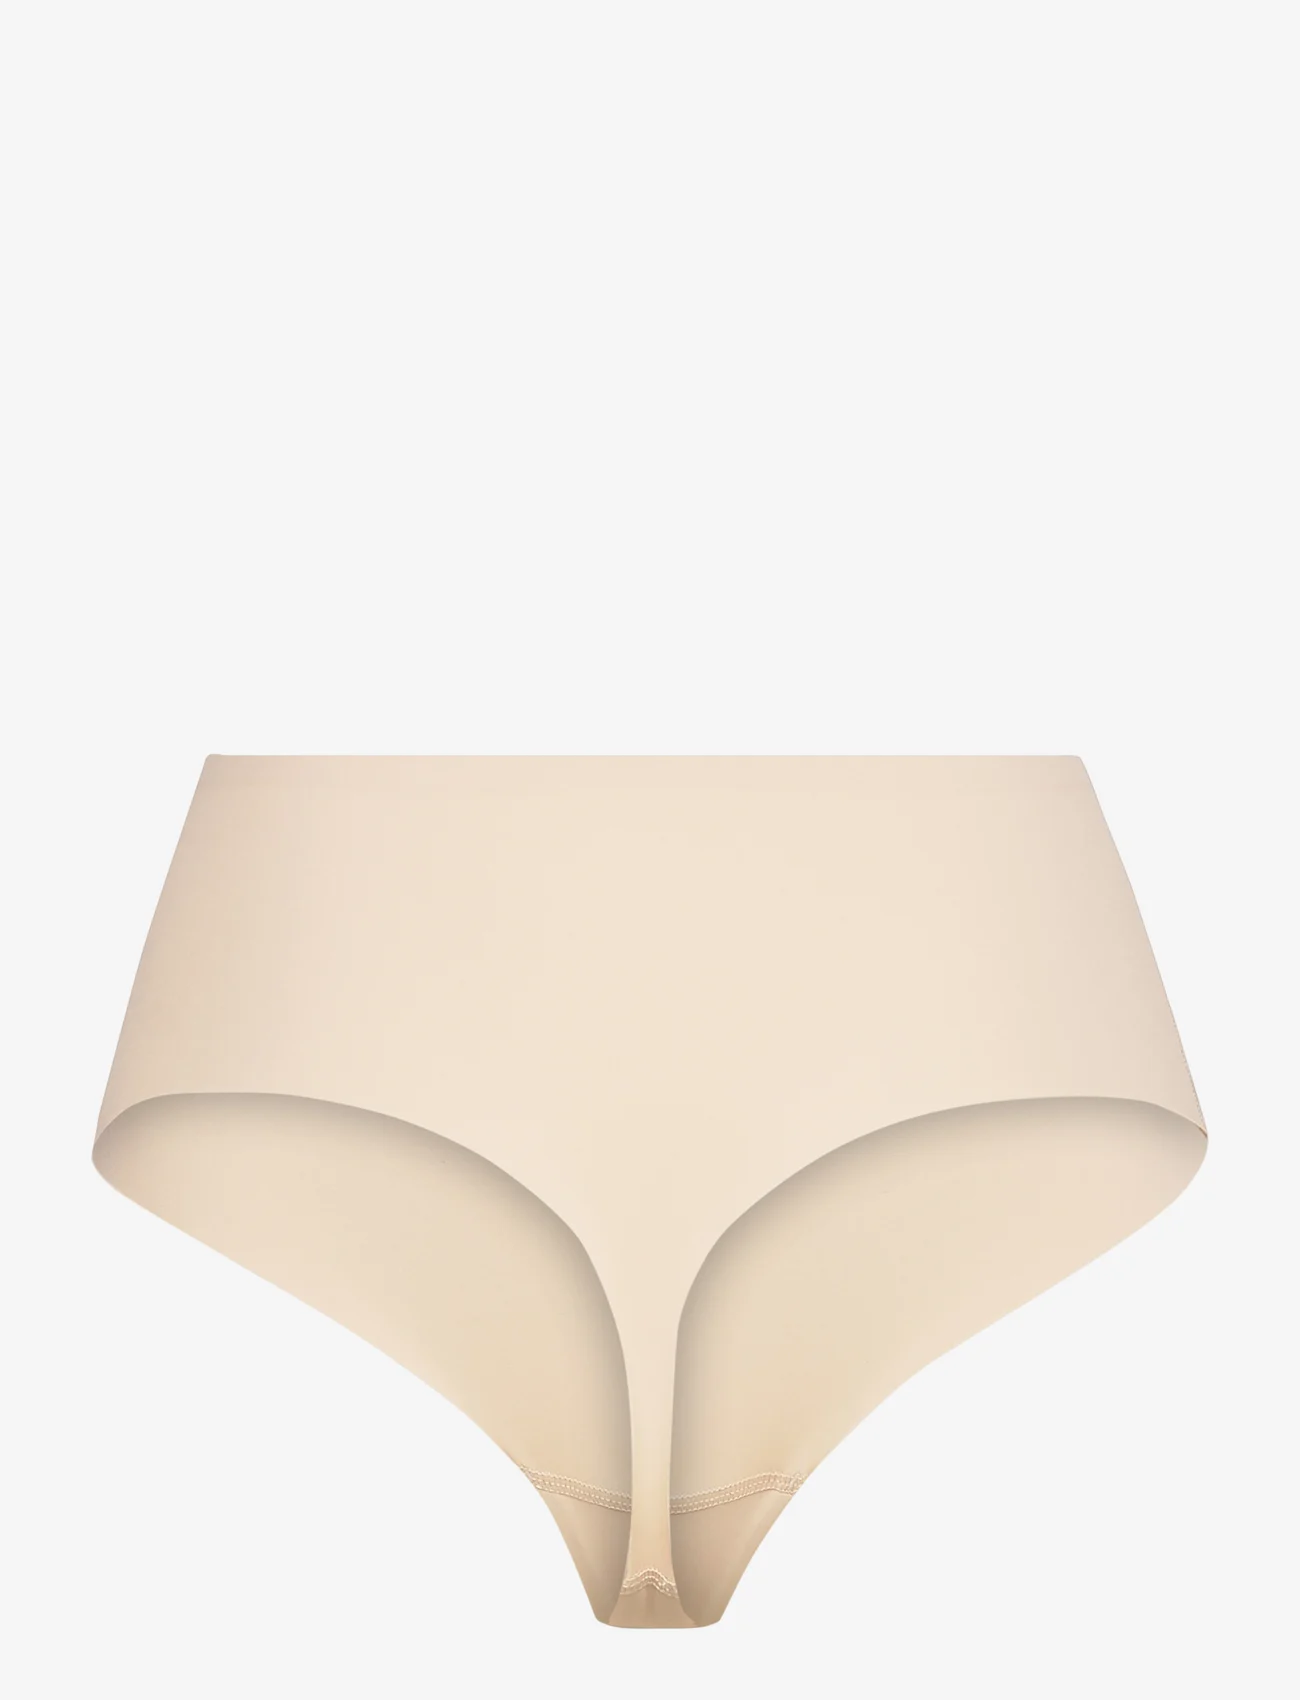 Esprit Bodywear Women - Made of recycled material: shaping-effect thong - seamless panties - dusty nude - 1